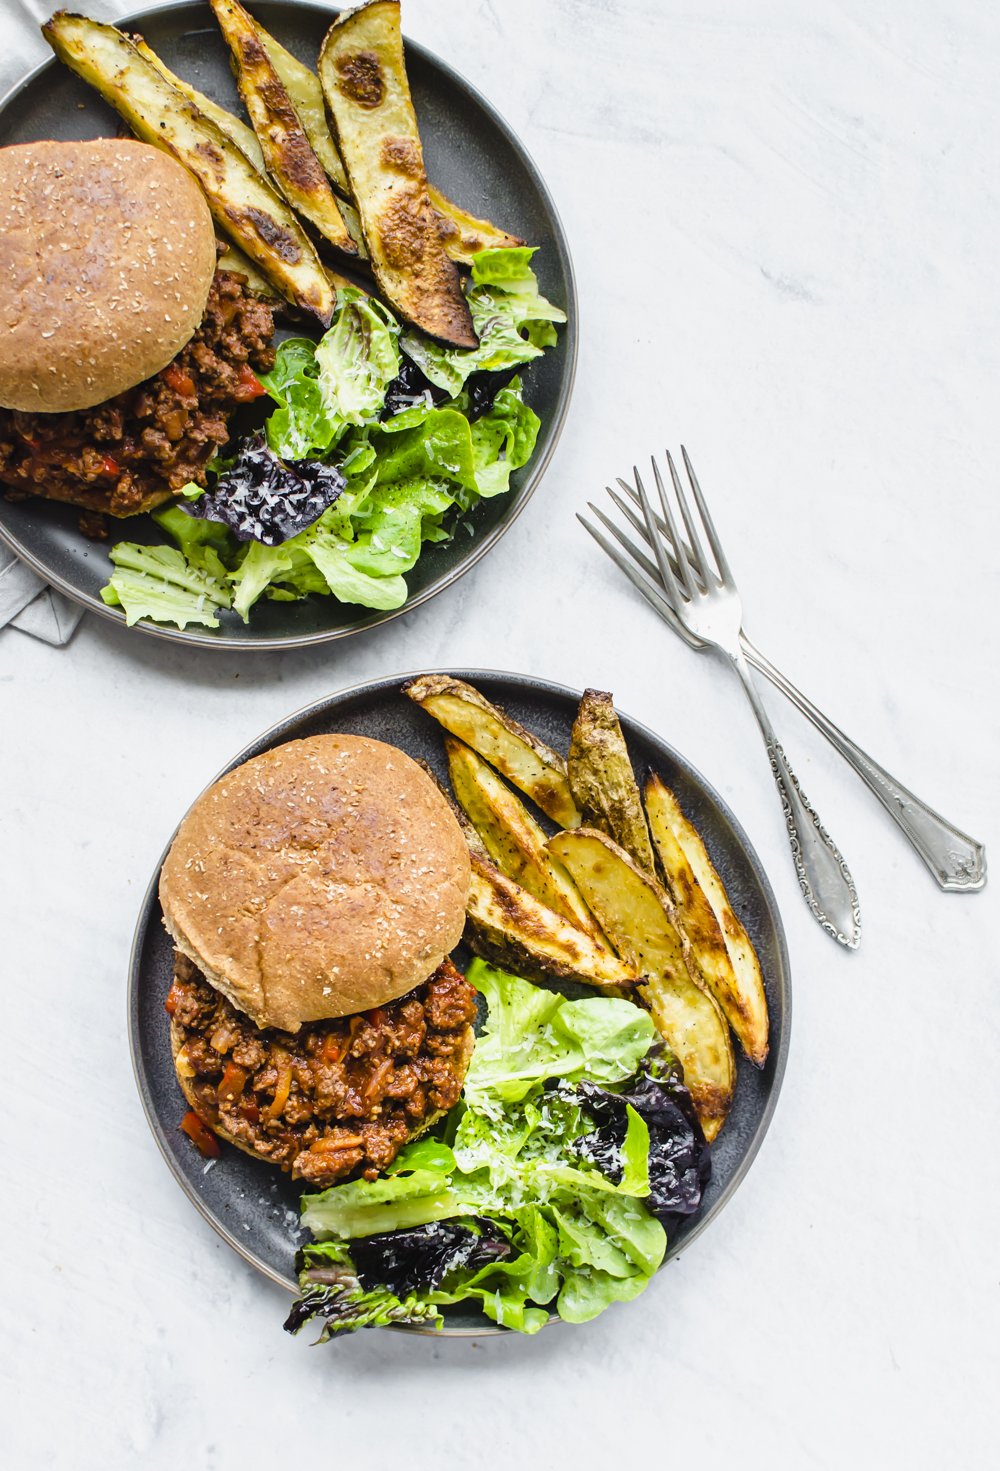 Instant Pot sloppy Joes on a plate with salad and oven fries.